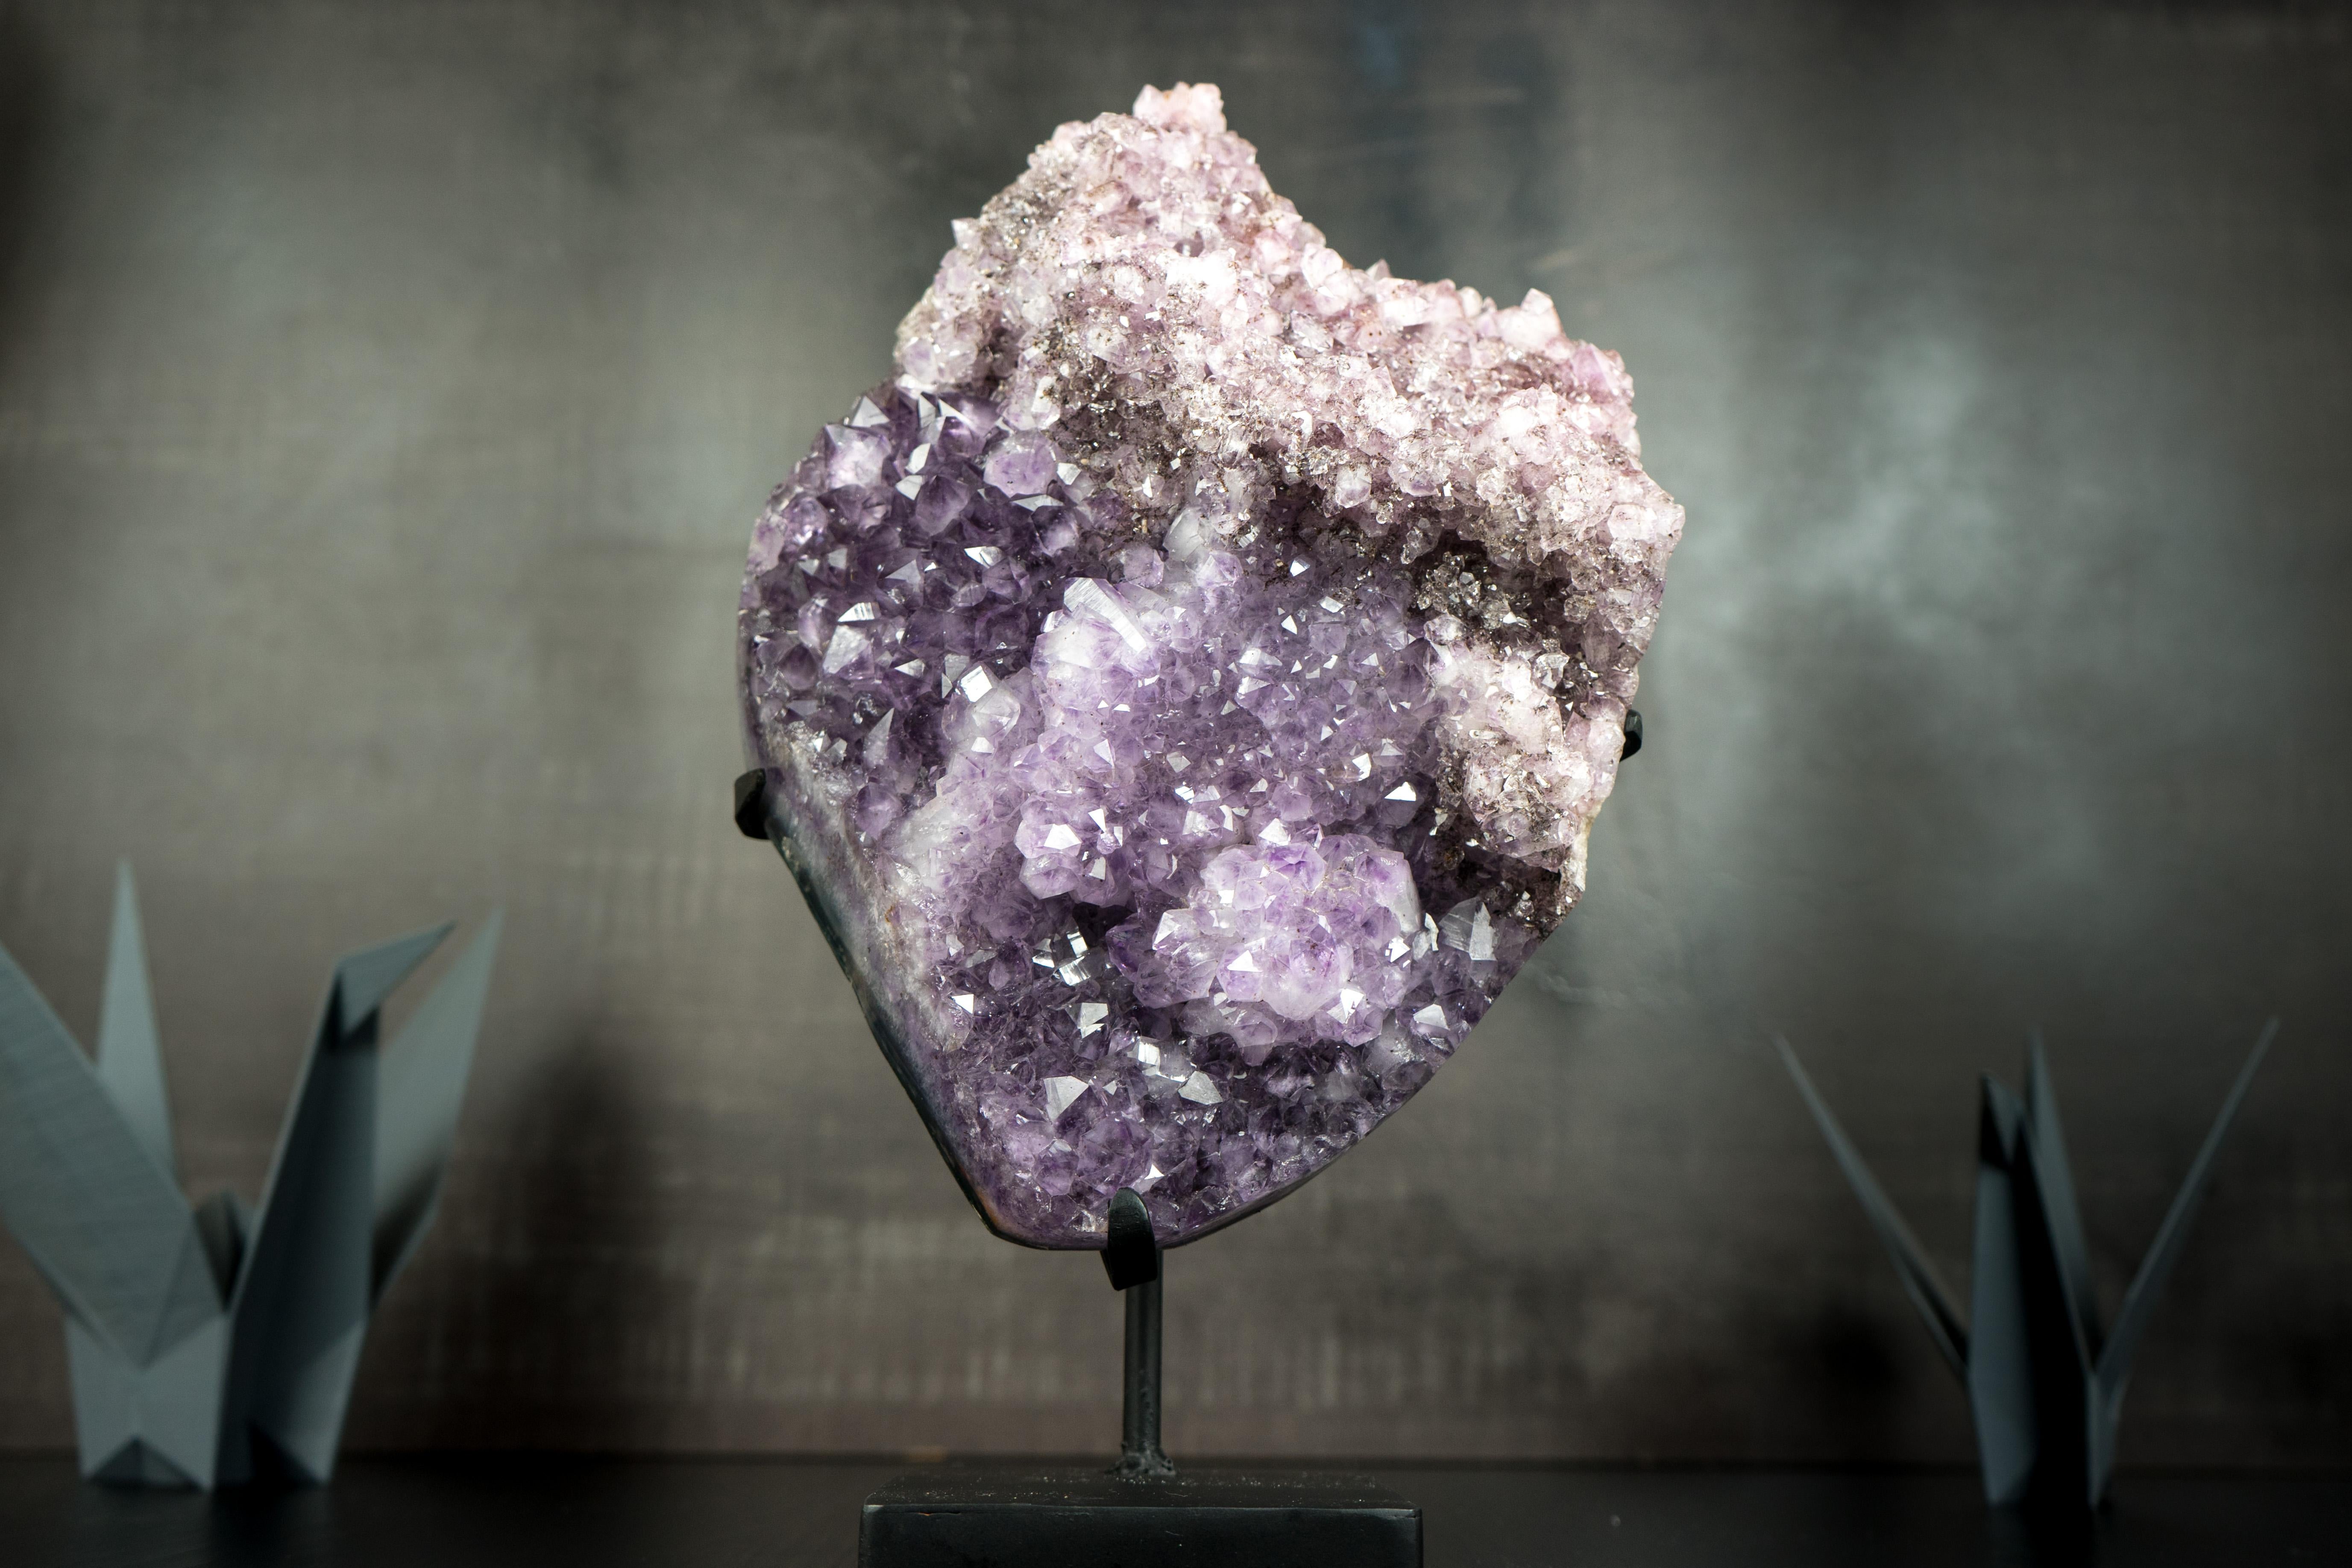 A rare Amethyst Cluster that could be in a Gallery, at a fine decor, or become a display specimen at a collection, this specimen brings us a rarely seen crown of Herkimer-Style, shiny Amethyst Druzy growing on top of a multi-colored Amethyst druzy.